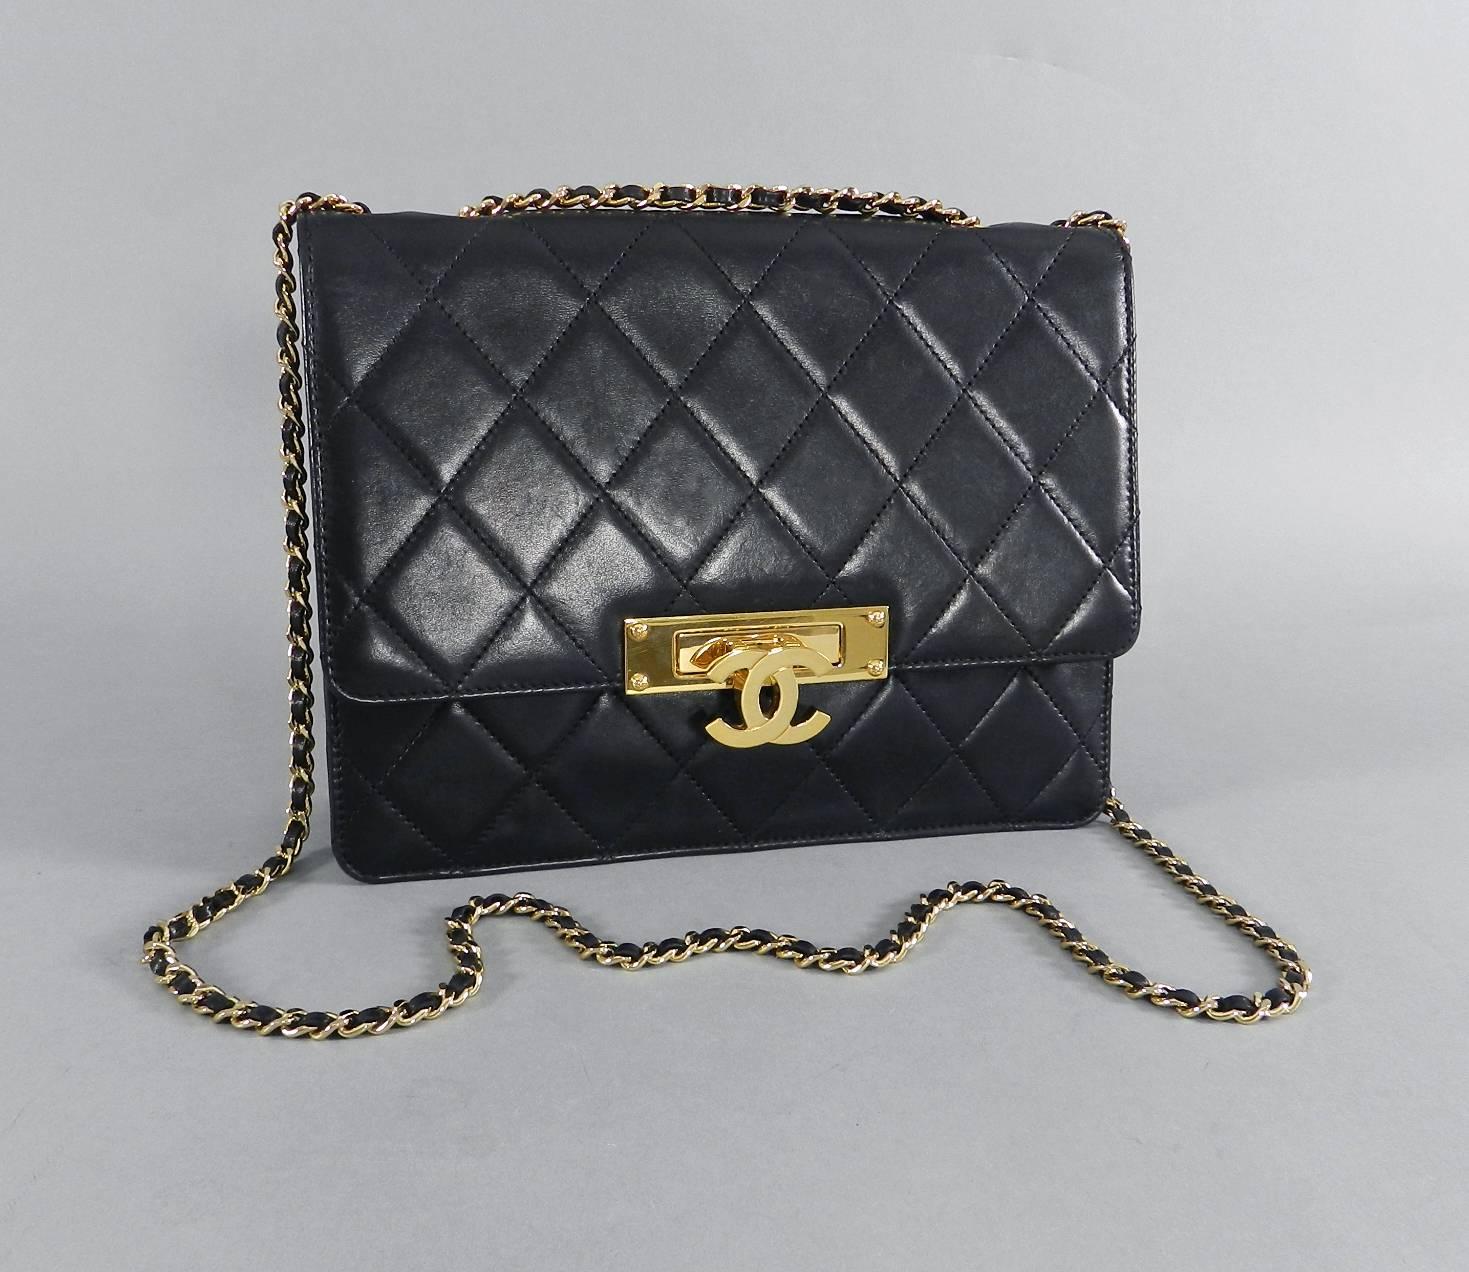 Chanel Black Lambskin Quilted Golden Class Flap Bag from the Cruise 2014 collection.  The bag features a bold Goldtone CC logo fold-down clasp and is lined with burgundy satin fabric. Size medium measuring 9.5 x 7.25 x 2.75".  Strap drop is